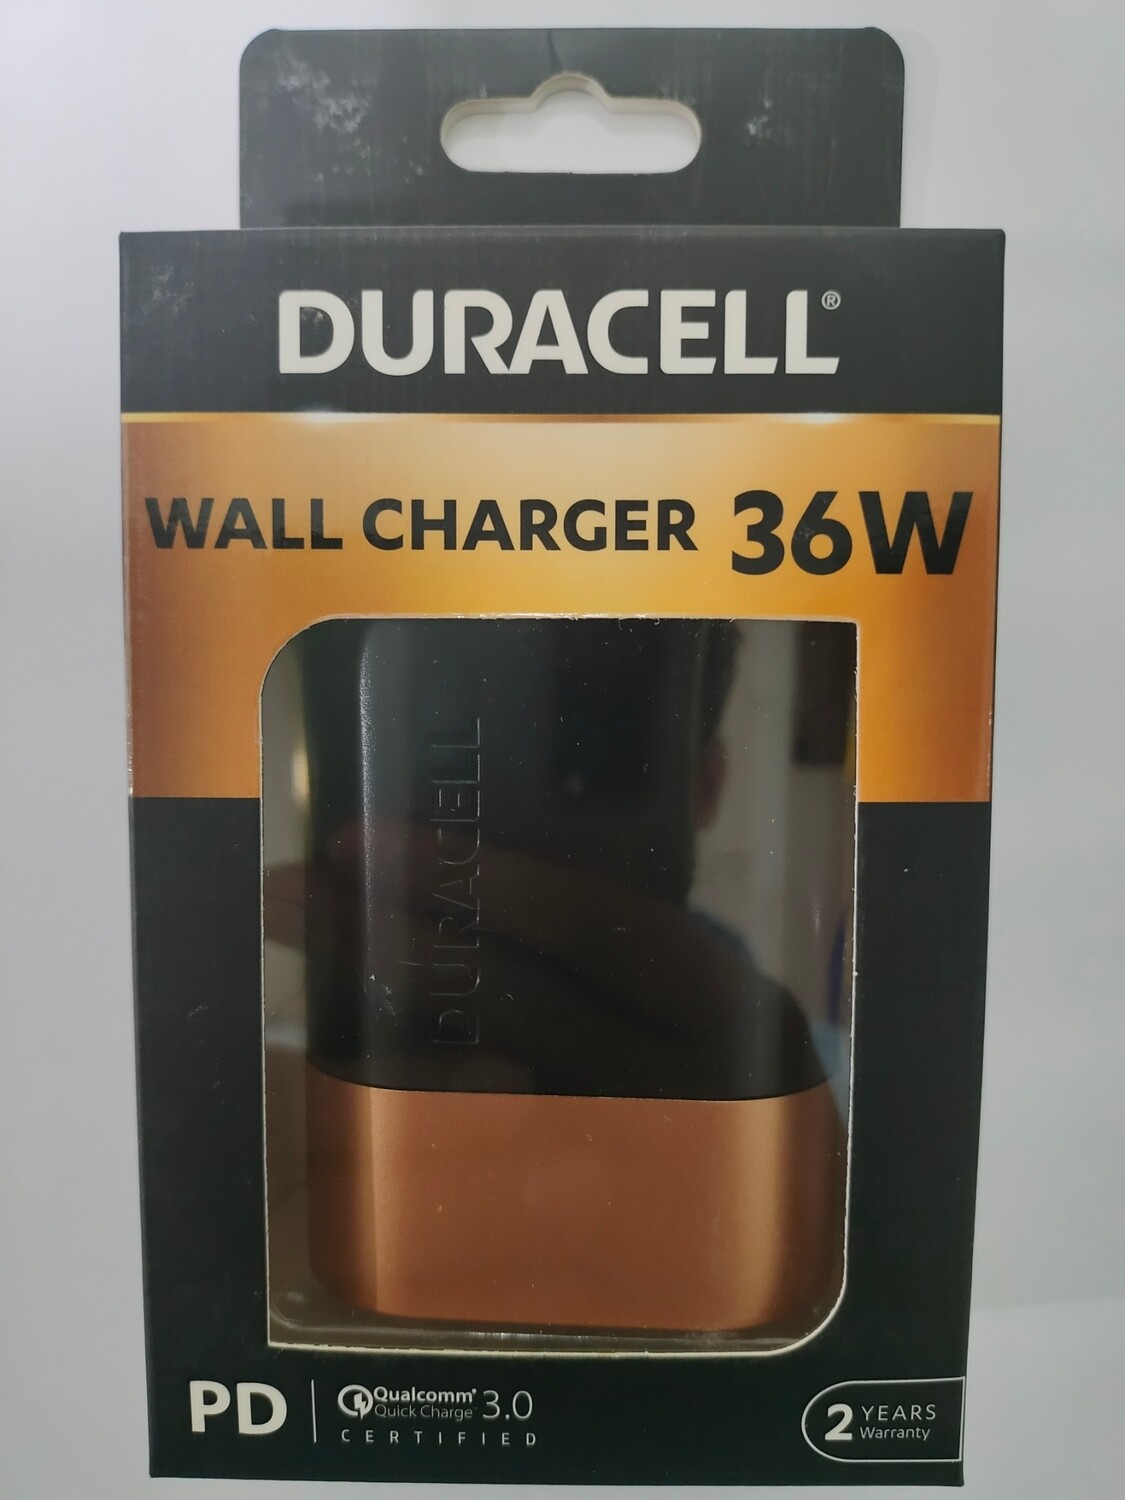 Duracell 36W Fast Wall Charger Adapter